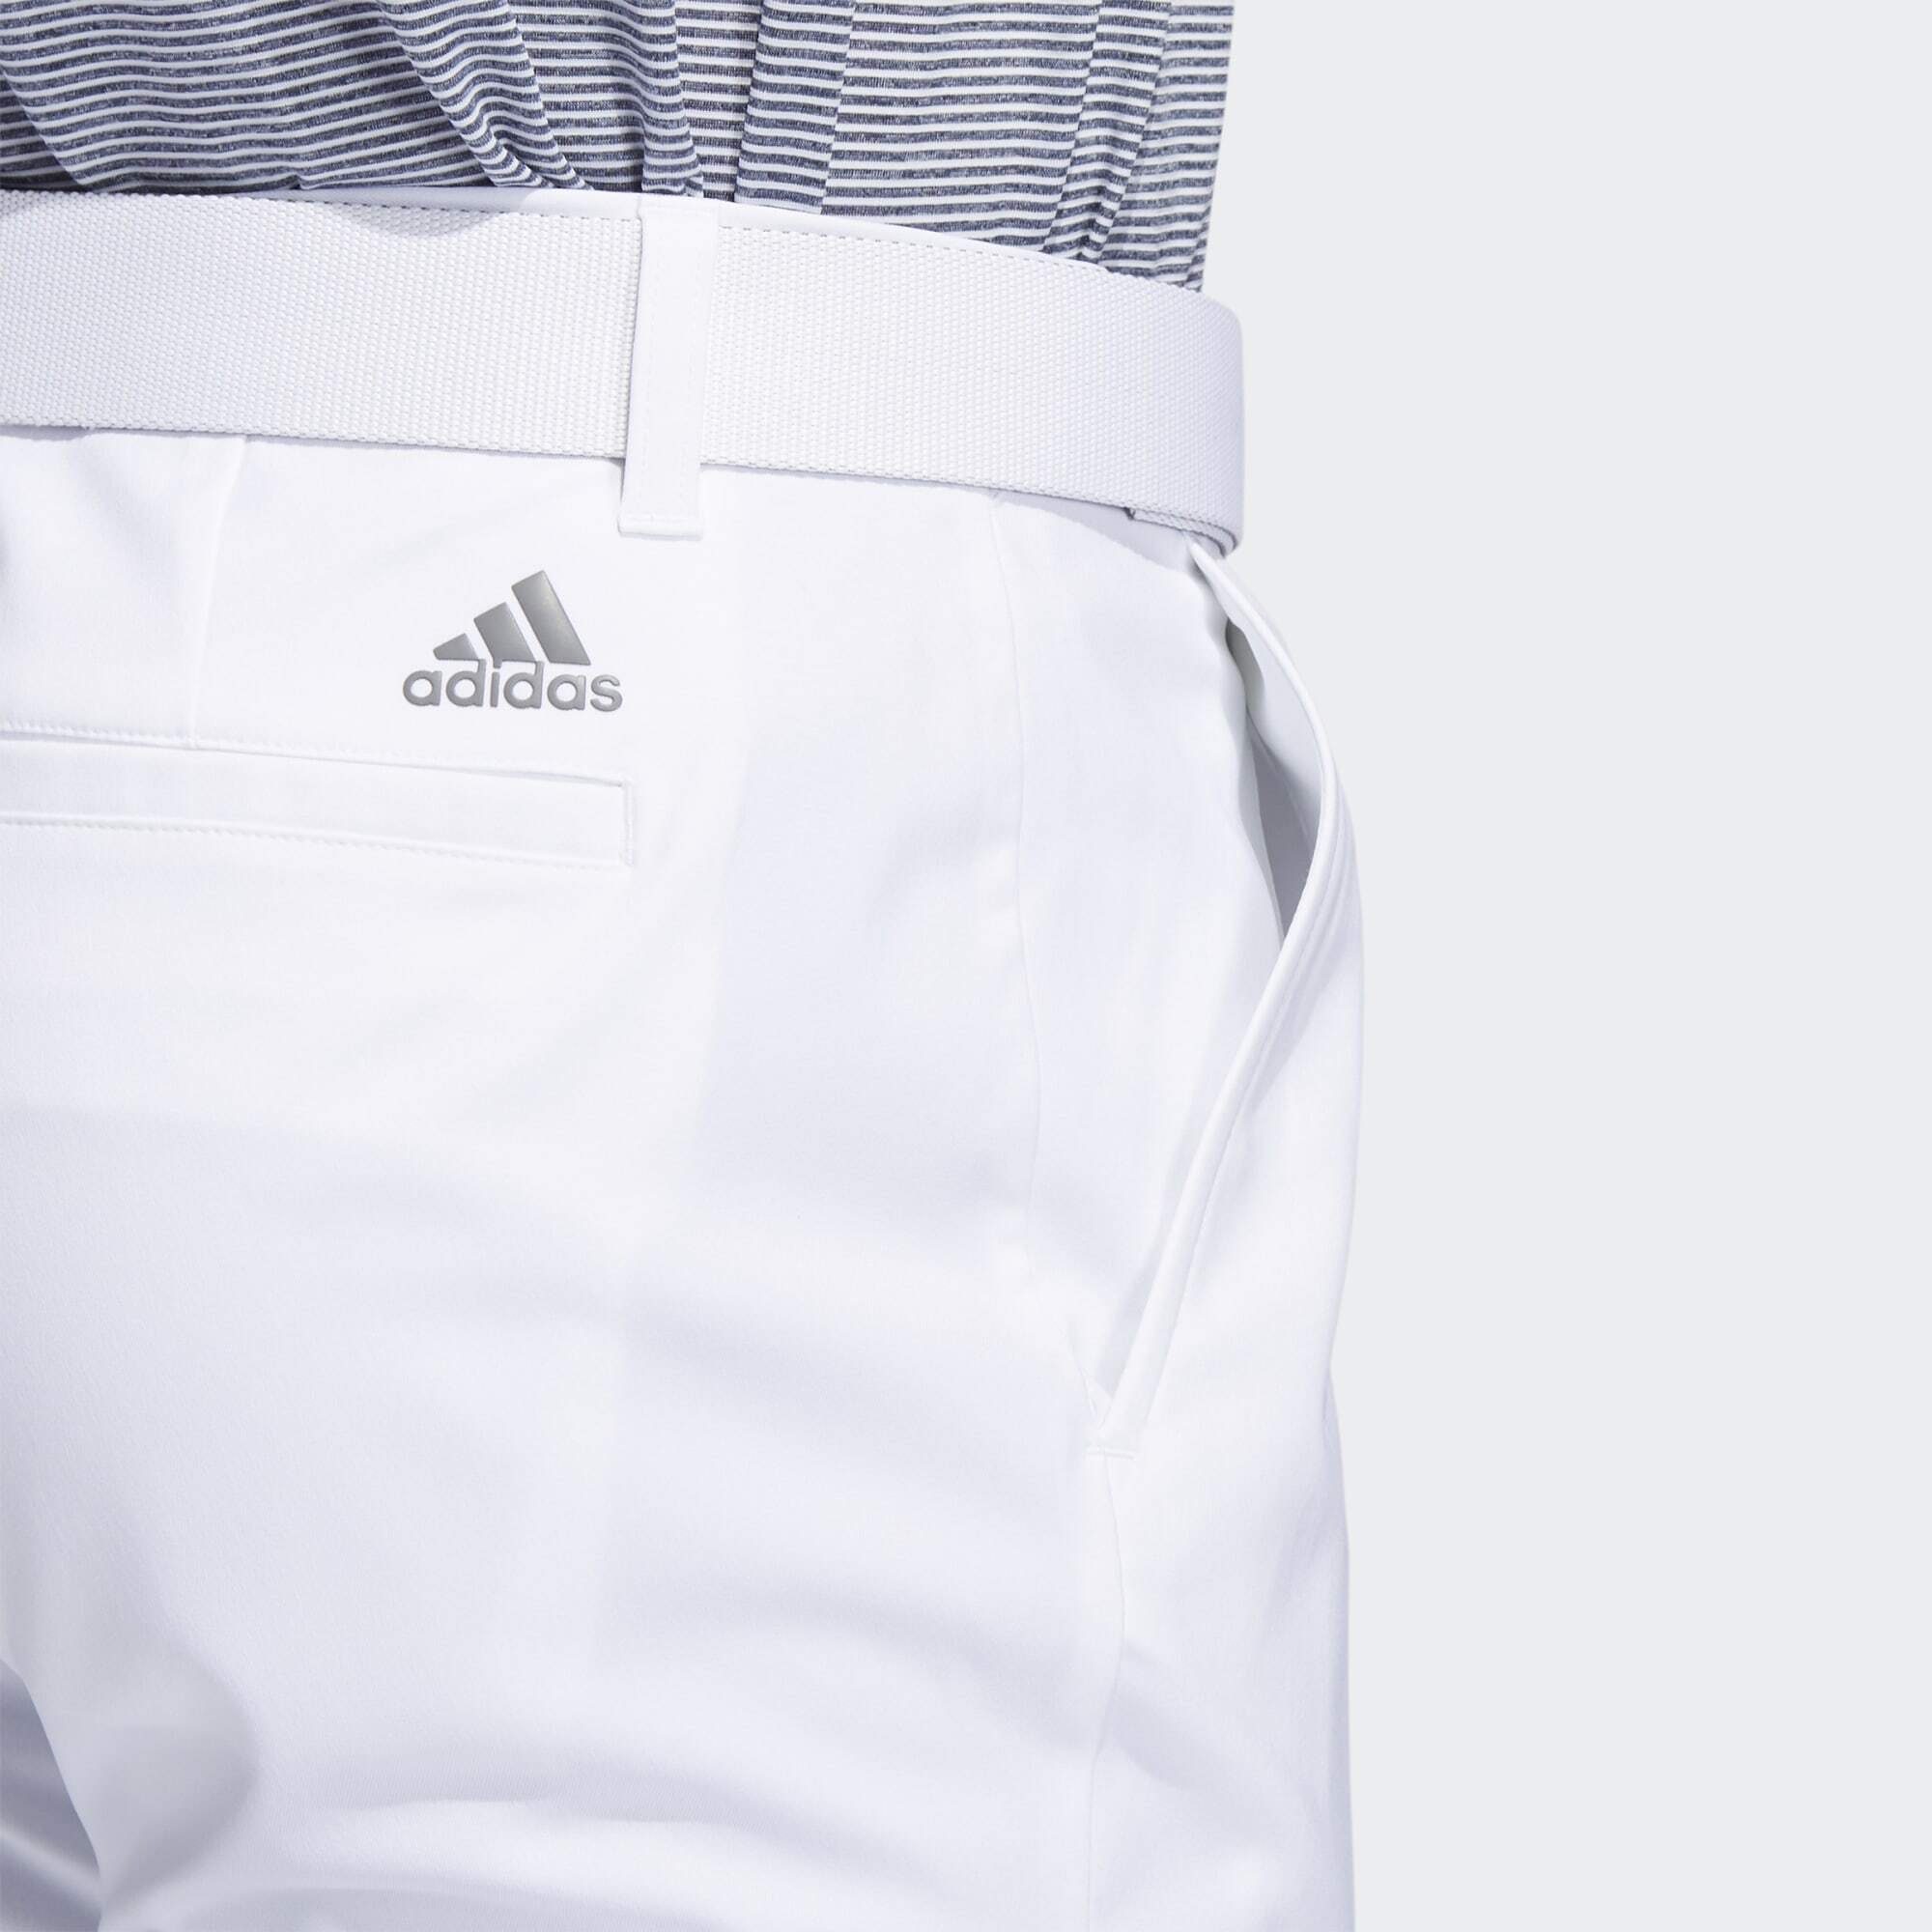 HOSE ULTIMATE365 White TAPERED Golfhose Performance adidas